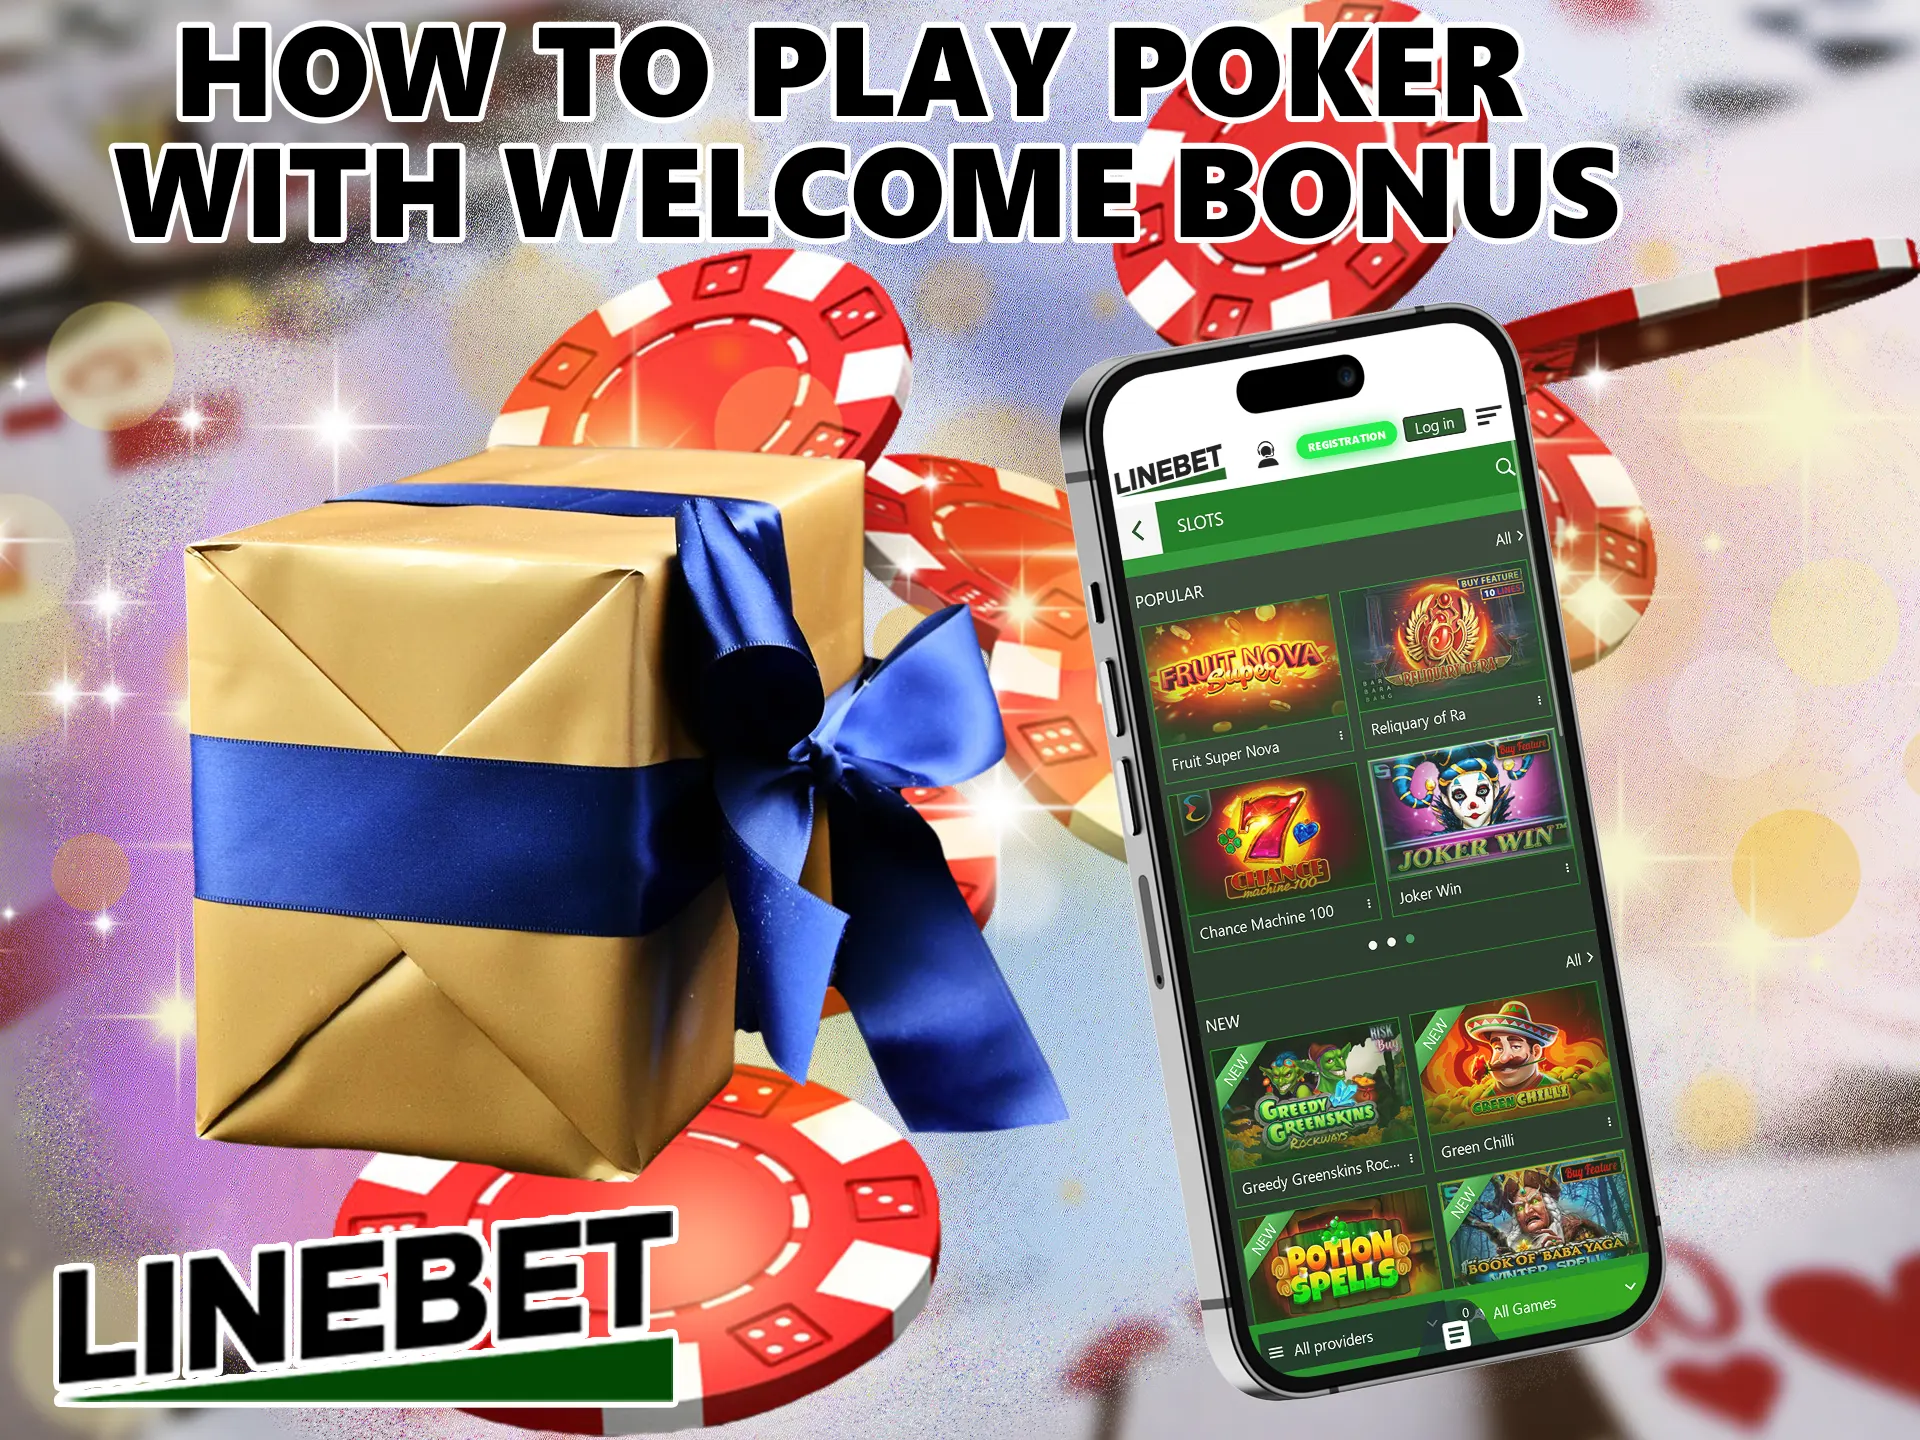 Linebet love customers and gives generous compliments, various offers and promotions.